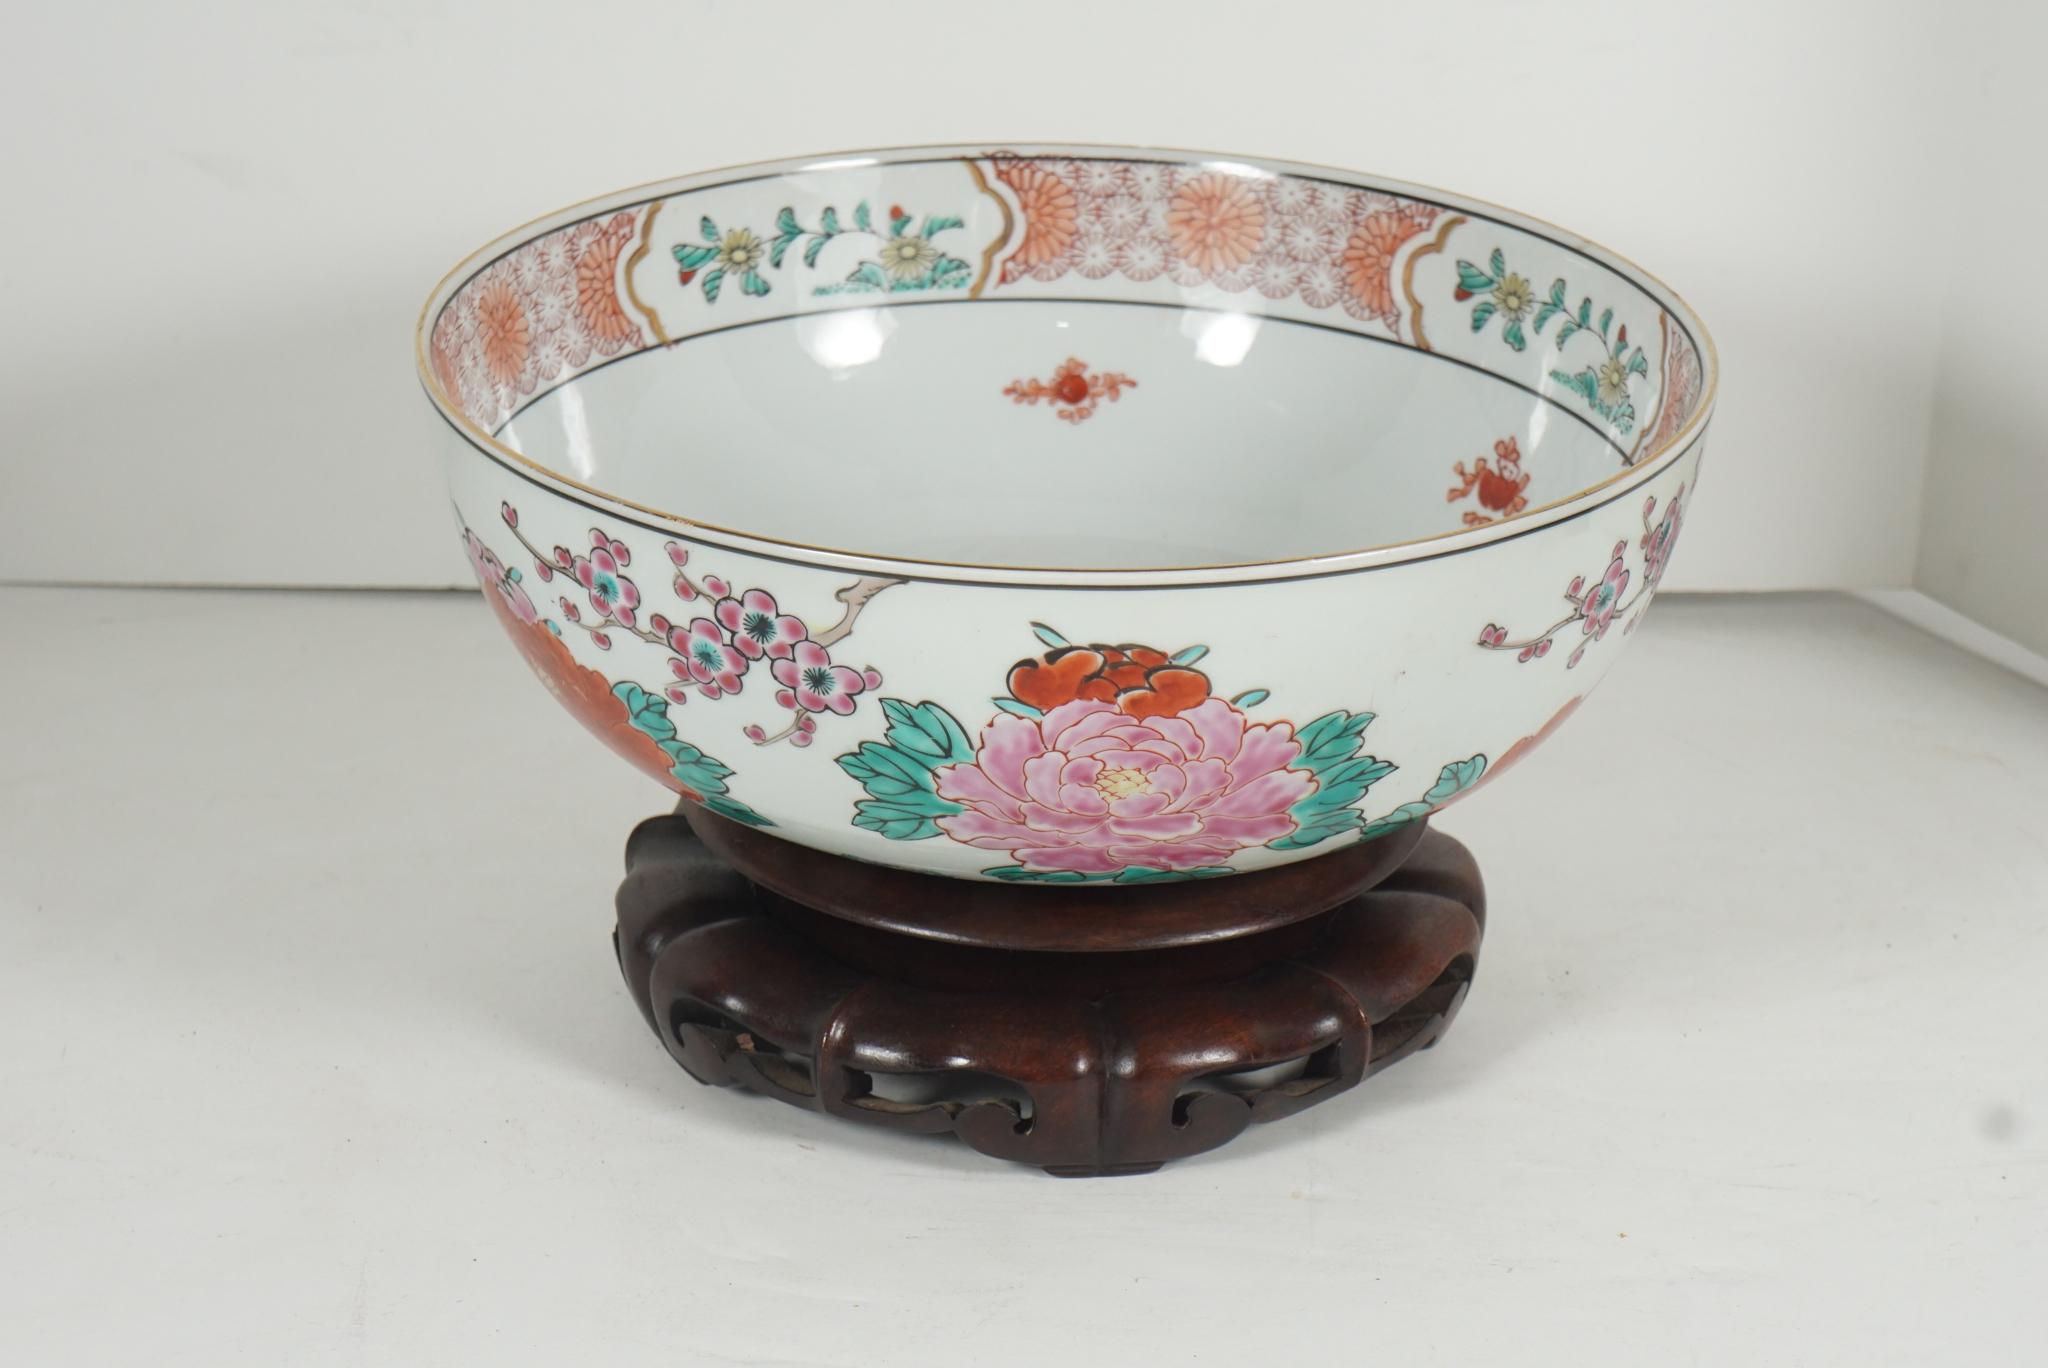 This nice medium-sized bowl has underglaze and overglaze painted details and was made circa 1945 to 1950. It is decorated in an asymmetrical pattern of prunus and chrysanthemums with one pheonix resting on a branch. The inside is decorated at the